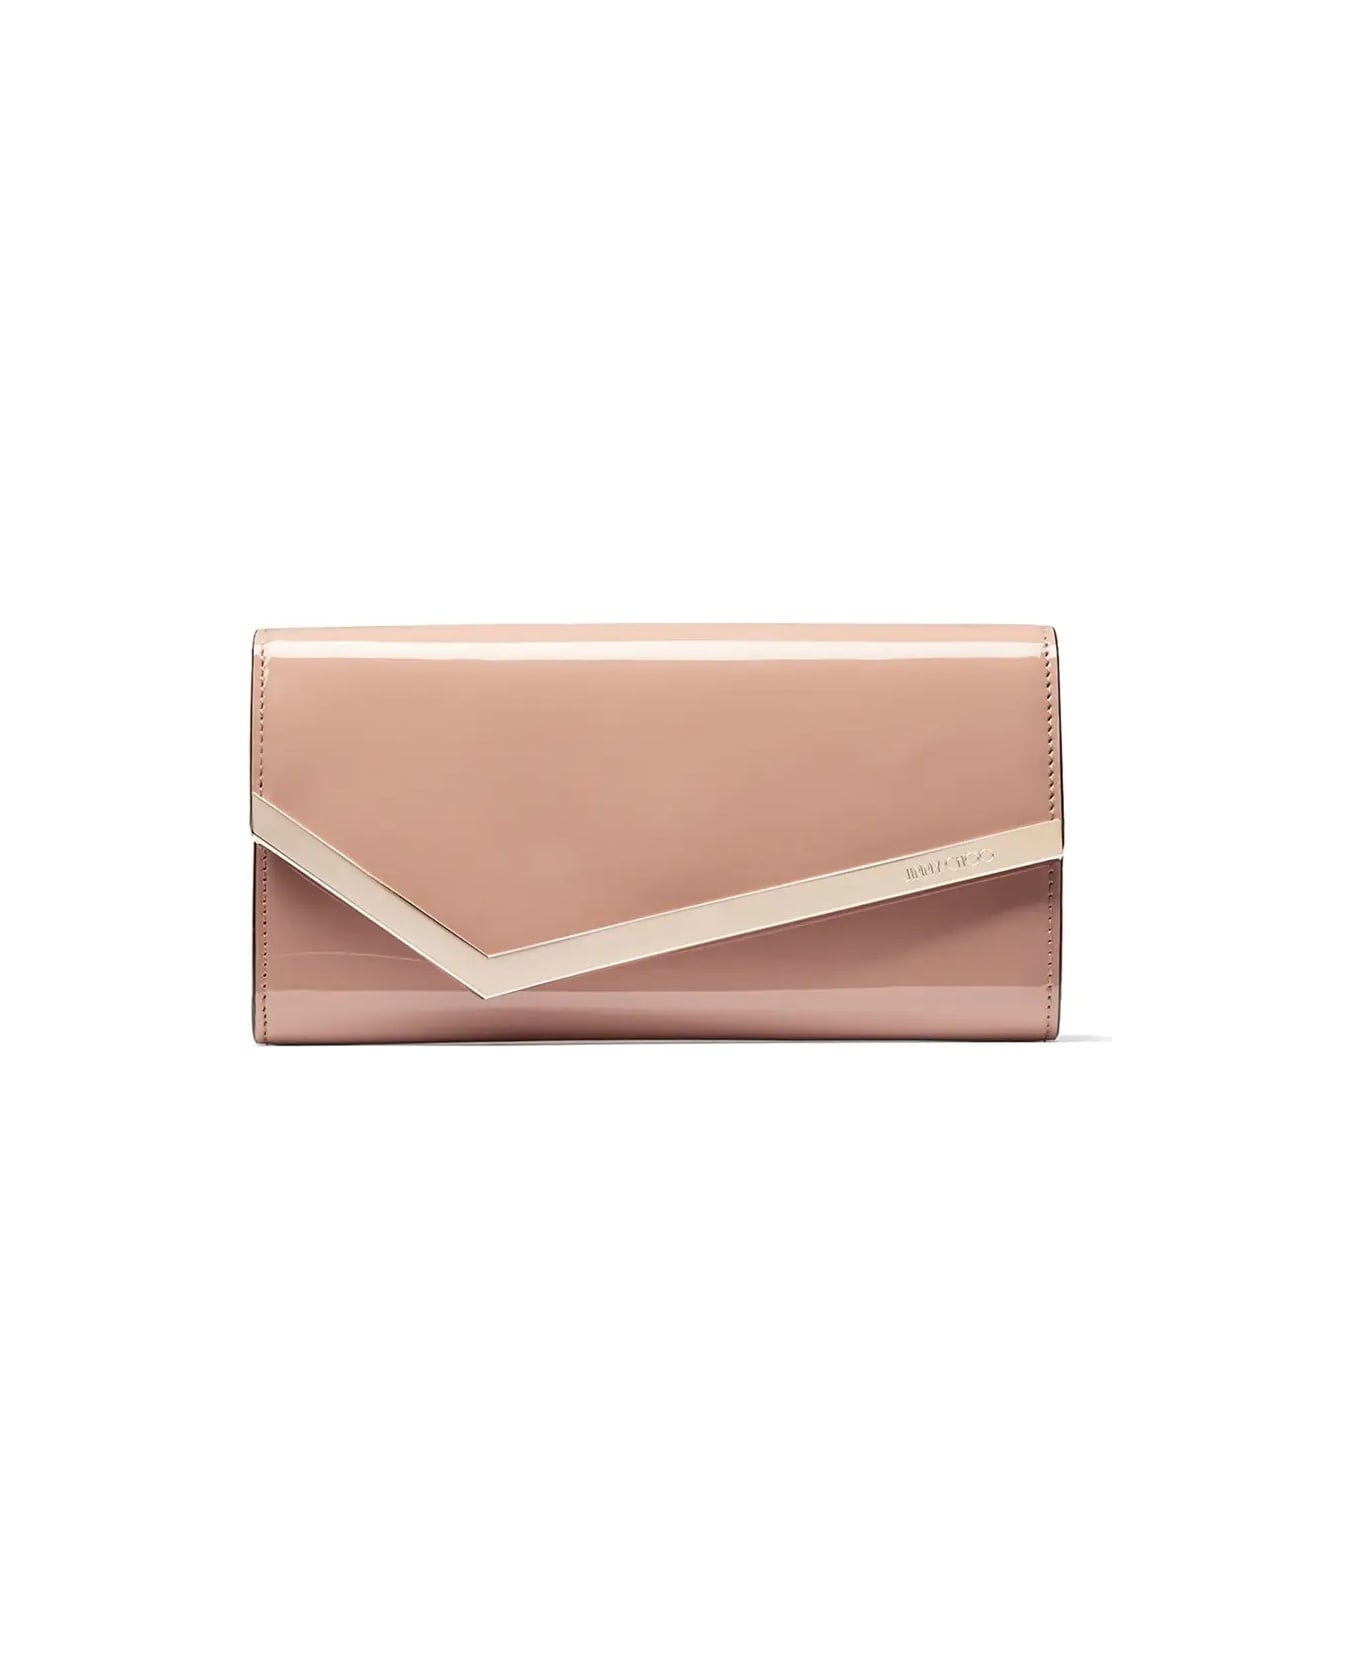 Jimmy Choo Emmie Clutch Bag In Ballet Pink Patent Leather - Pink クラッチバッグ